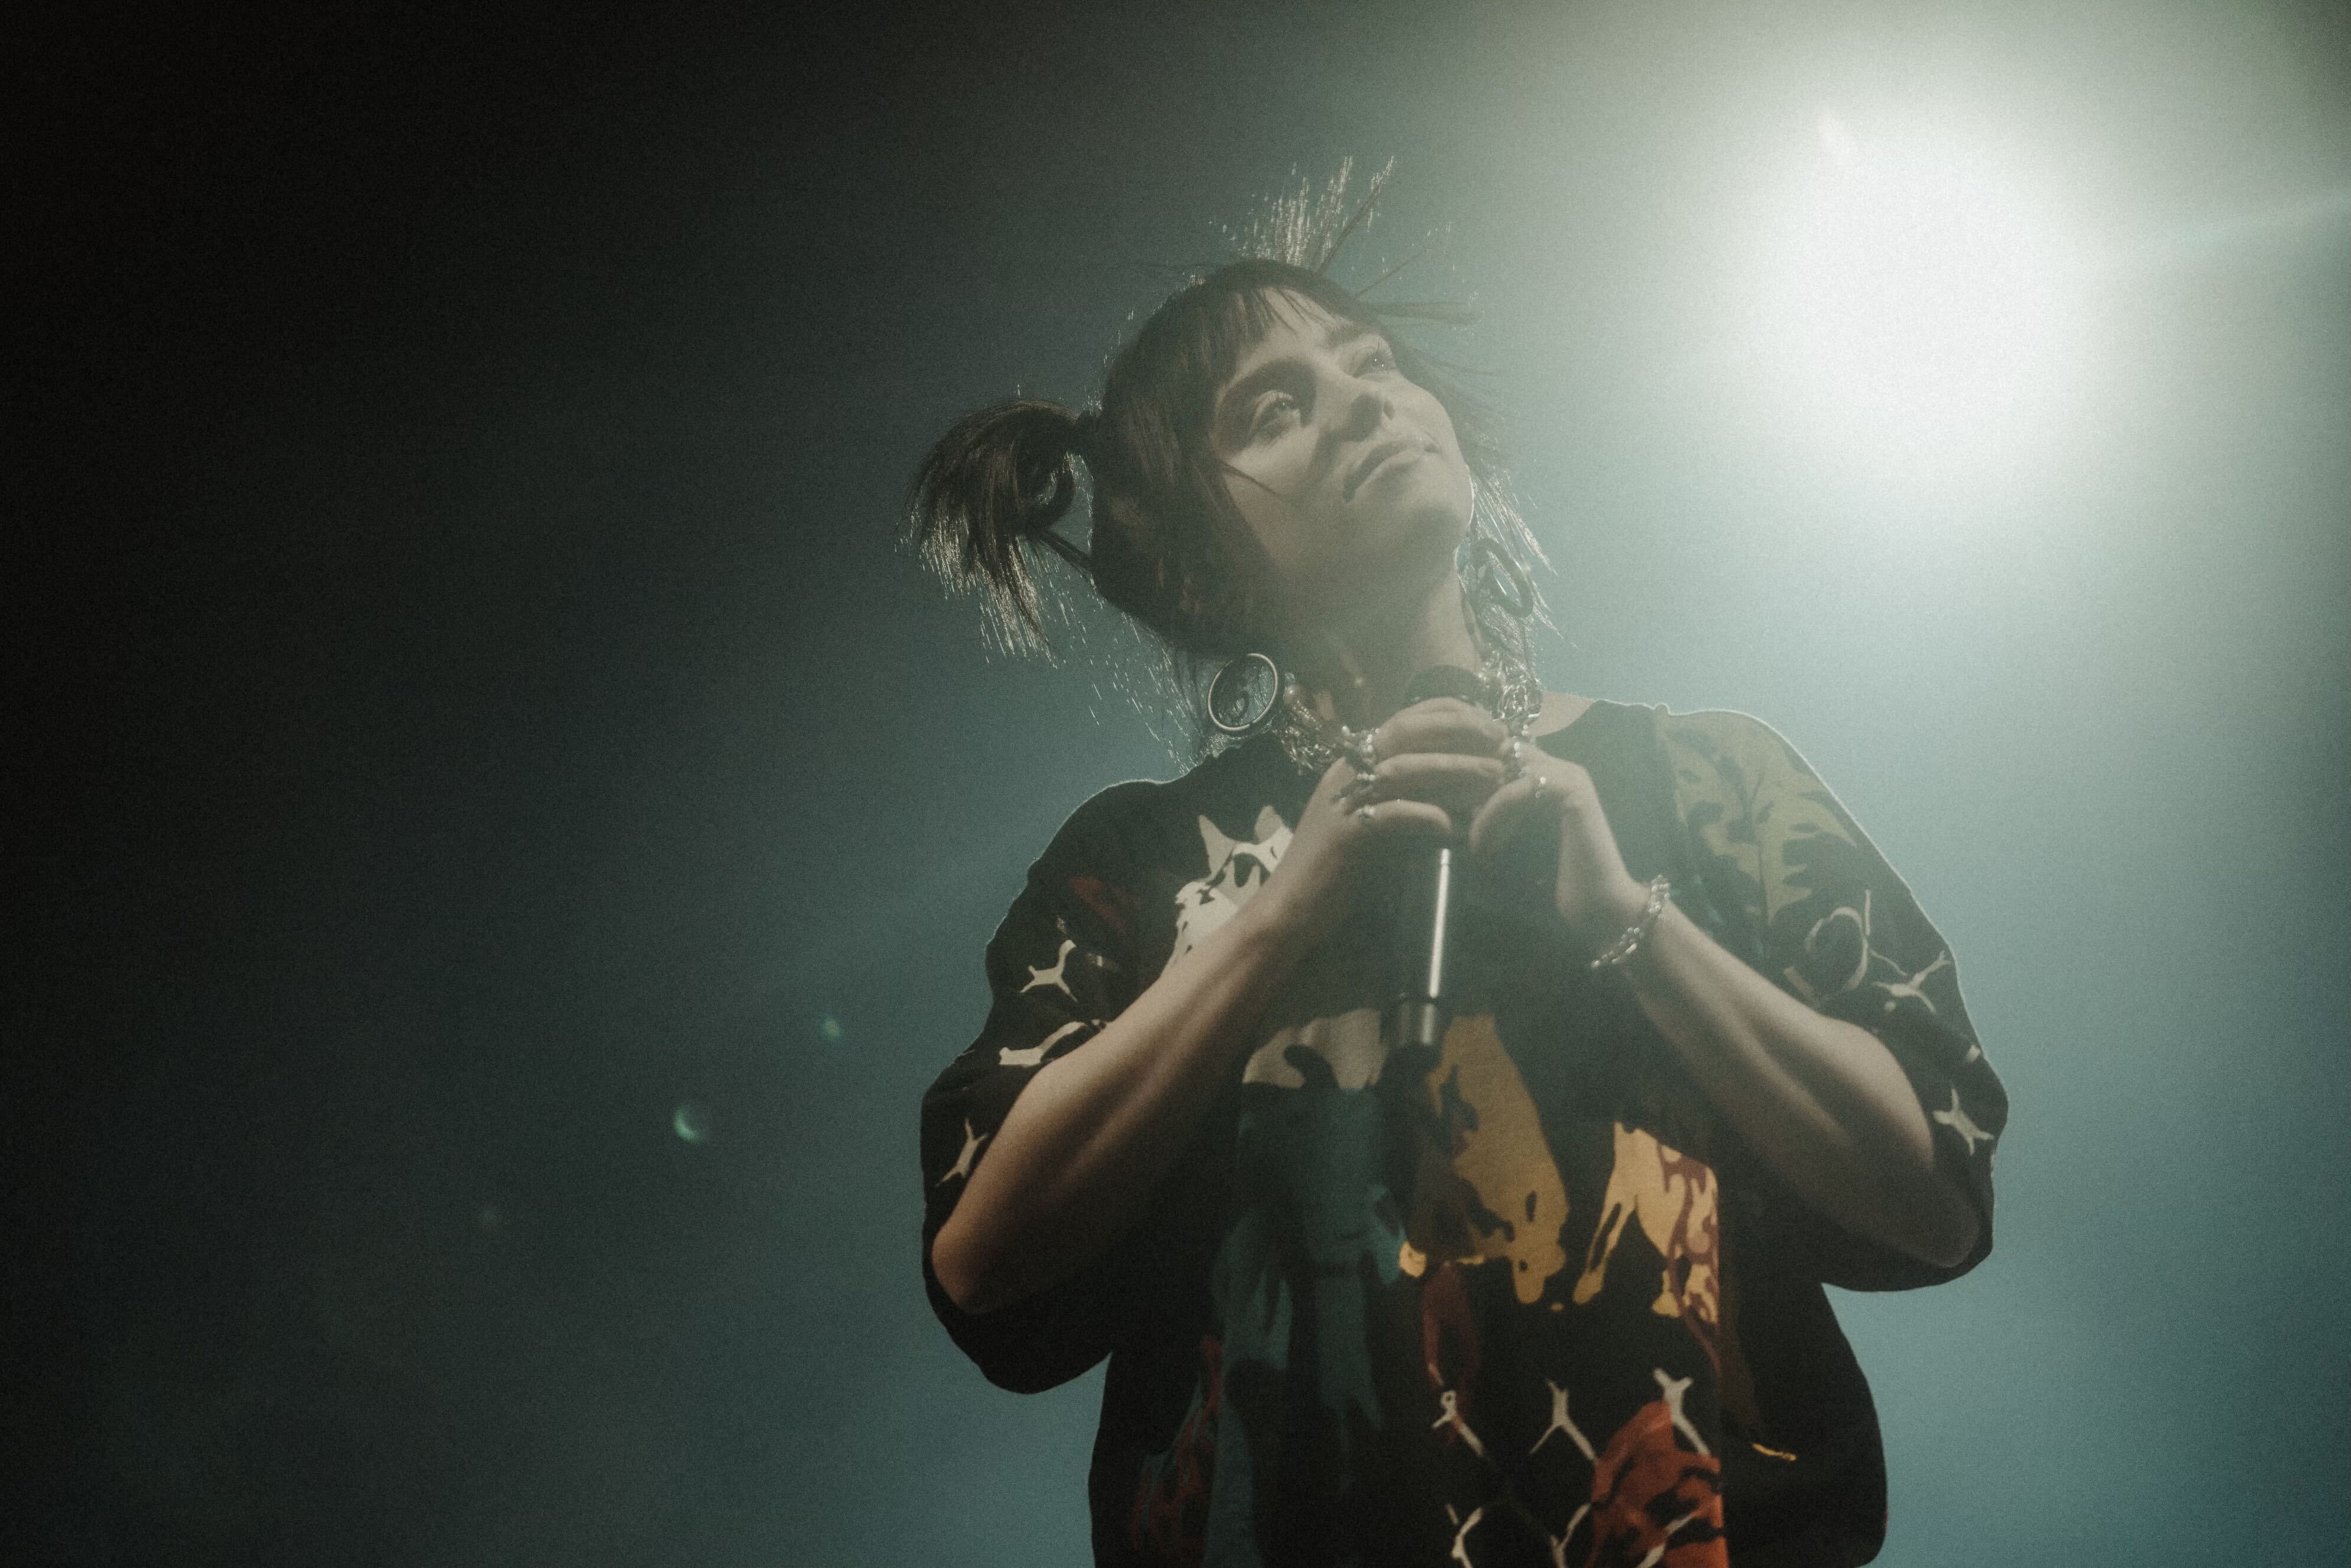 BILLIE EILISH, STATE FARM ARENA AND LIVE NATION TEAM UP TO ACHIEVE  FIRST ‘ZERO WASTE’ SOLD-OUT EVENT ON BILLIE EILISH’S ‘HAPPIER THAN EVER, THE WORLD TOUR’ 